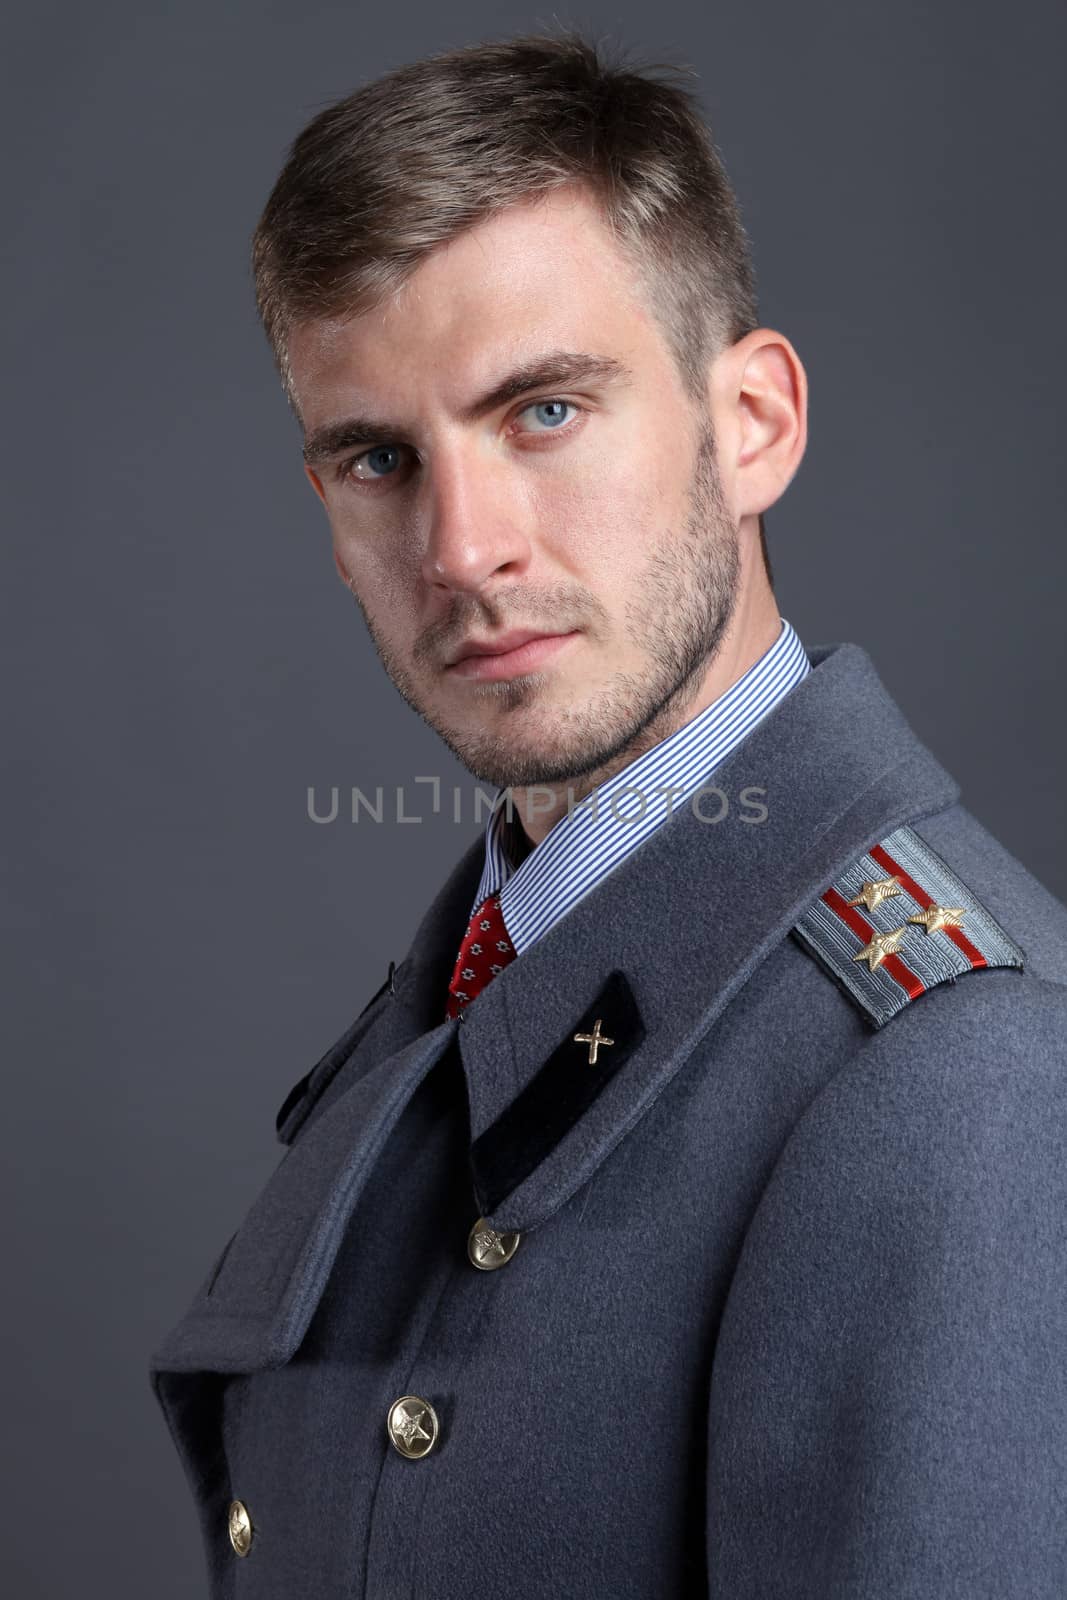 close-up portrait of Russian military officer